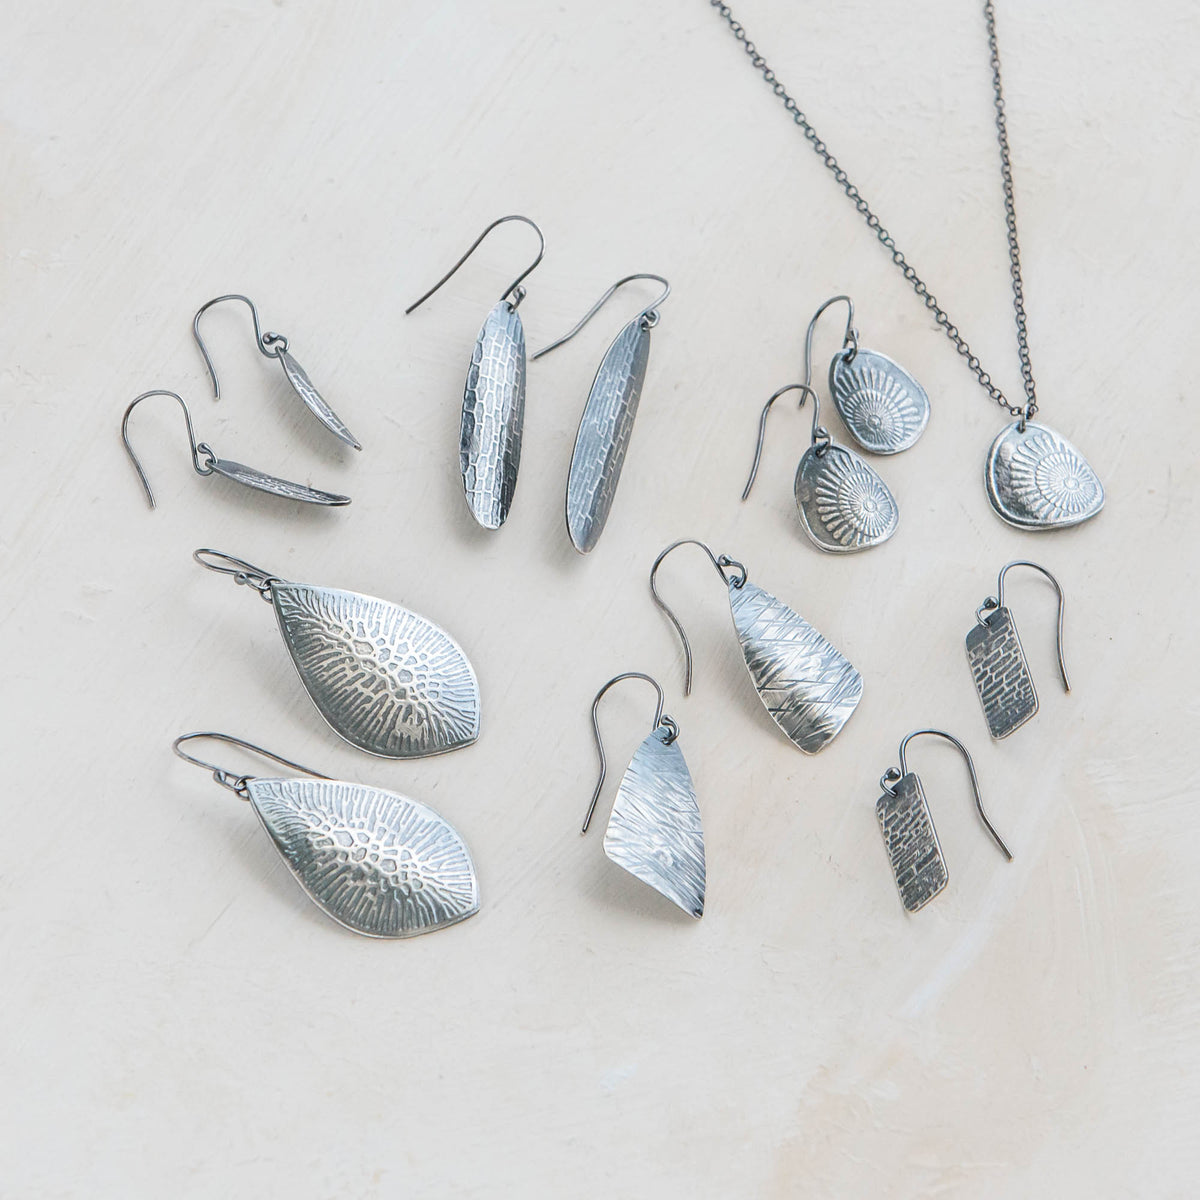 sterling silver jewellery york Statement Fashion Jewellery: Large Chunky  Curved Worn Silver Tone Earrings with Pitted Finish (7.5cm) (M494)A)  Sterling silver jewellery range of Fashion and costume and body jewellery.